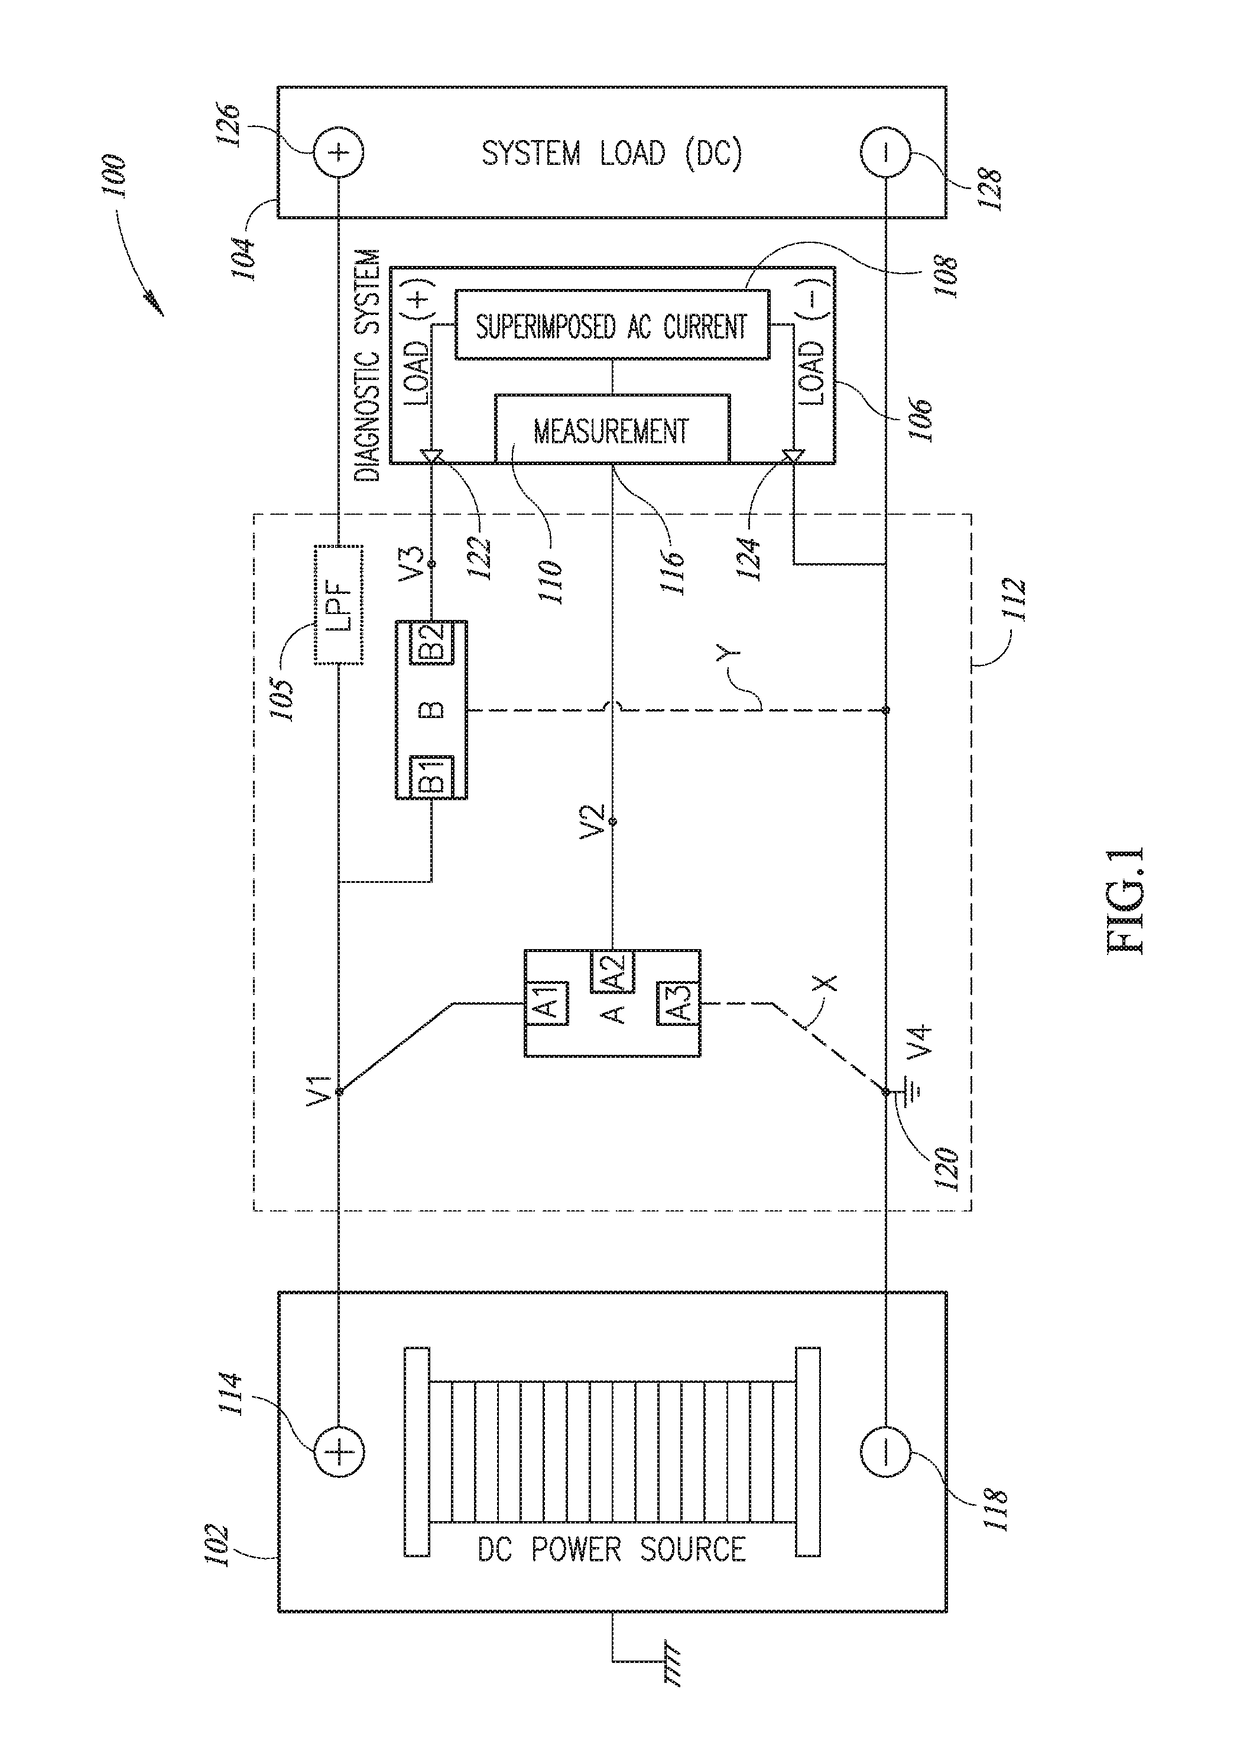 Reduced stack voltage circuitry for energy storage system diagnostics